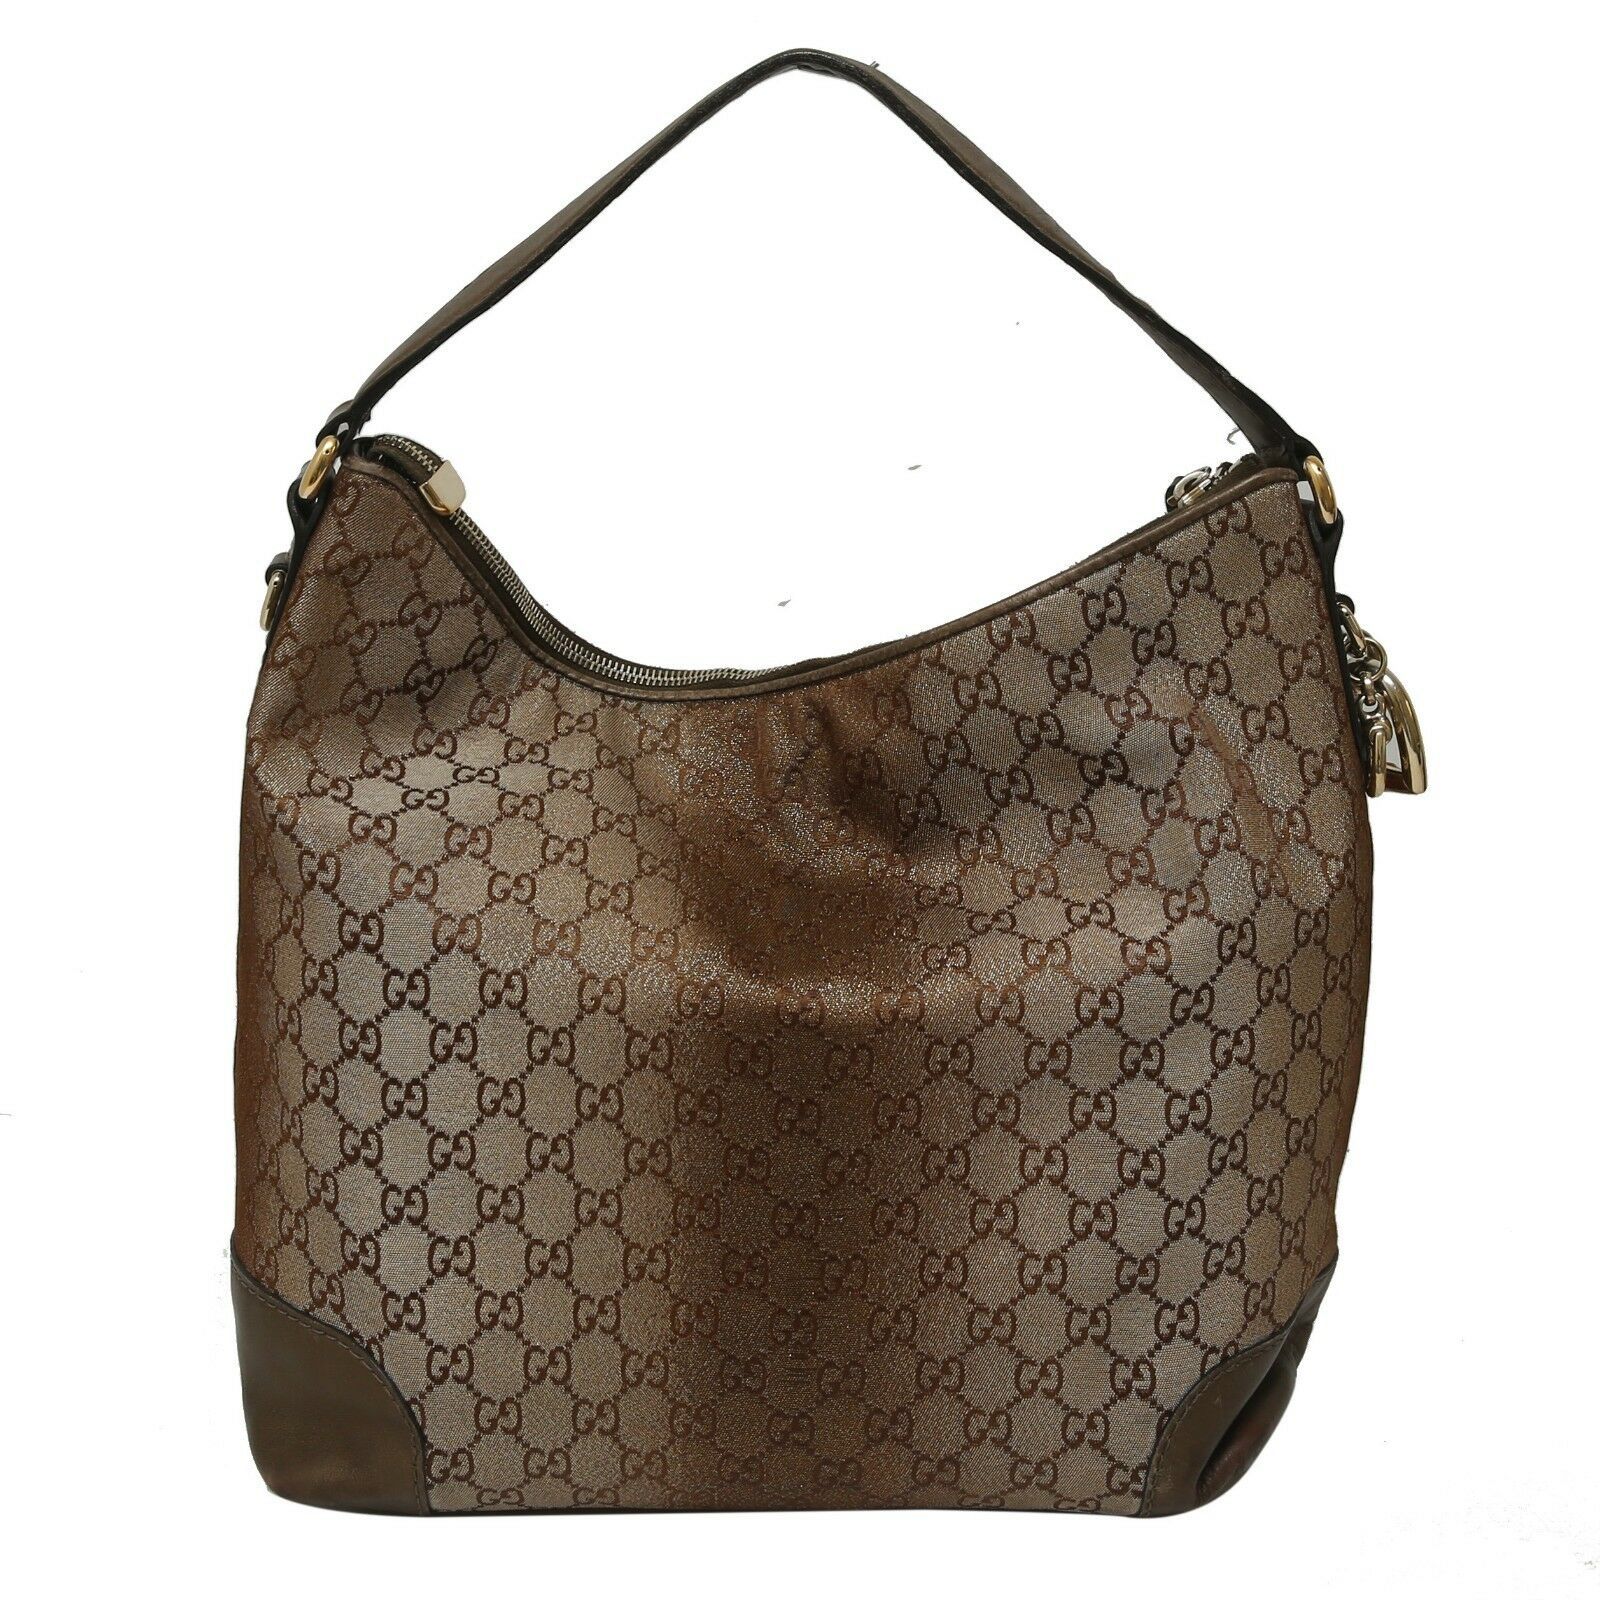 Authentic GUCCI Guccissima Canvas Glitter Hobo Bag with Heart Motif Leather Trim - $467.49